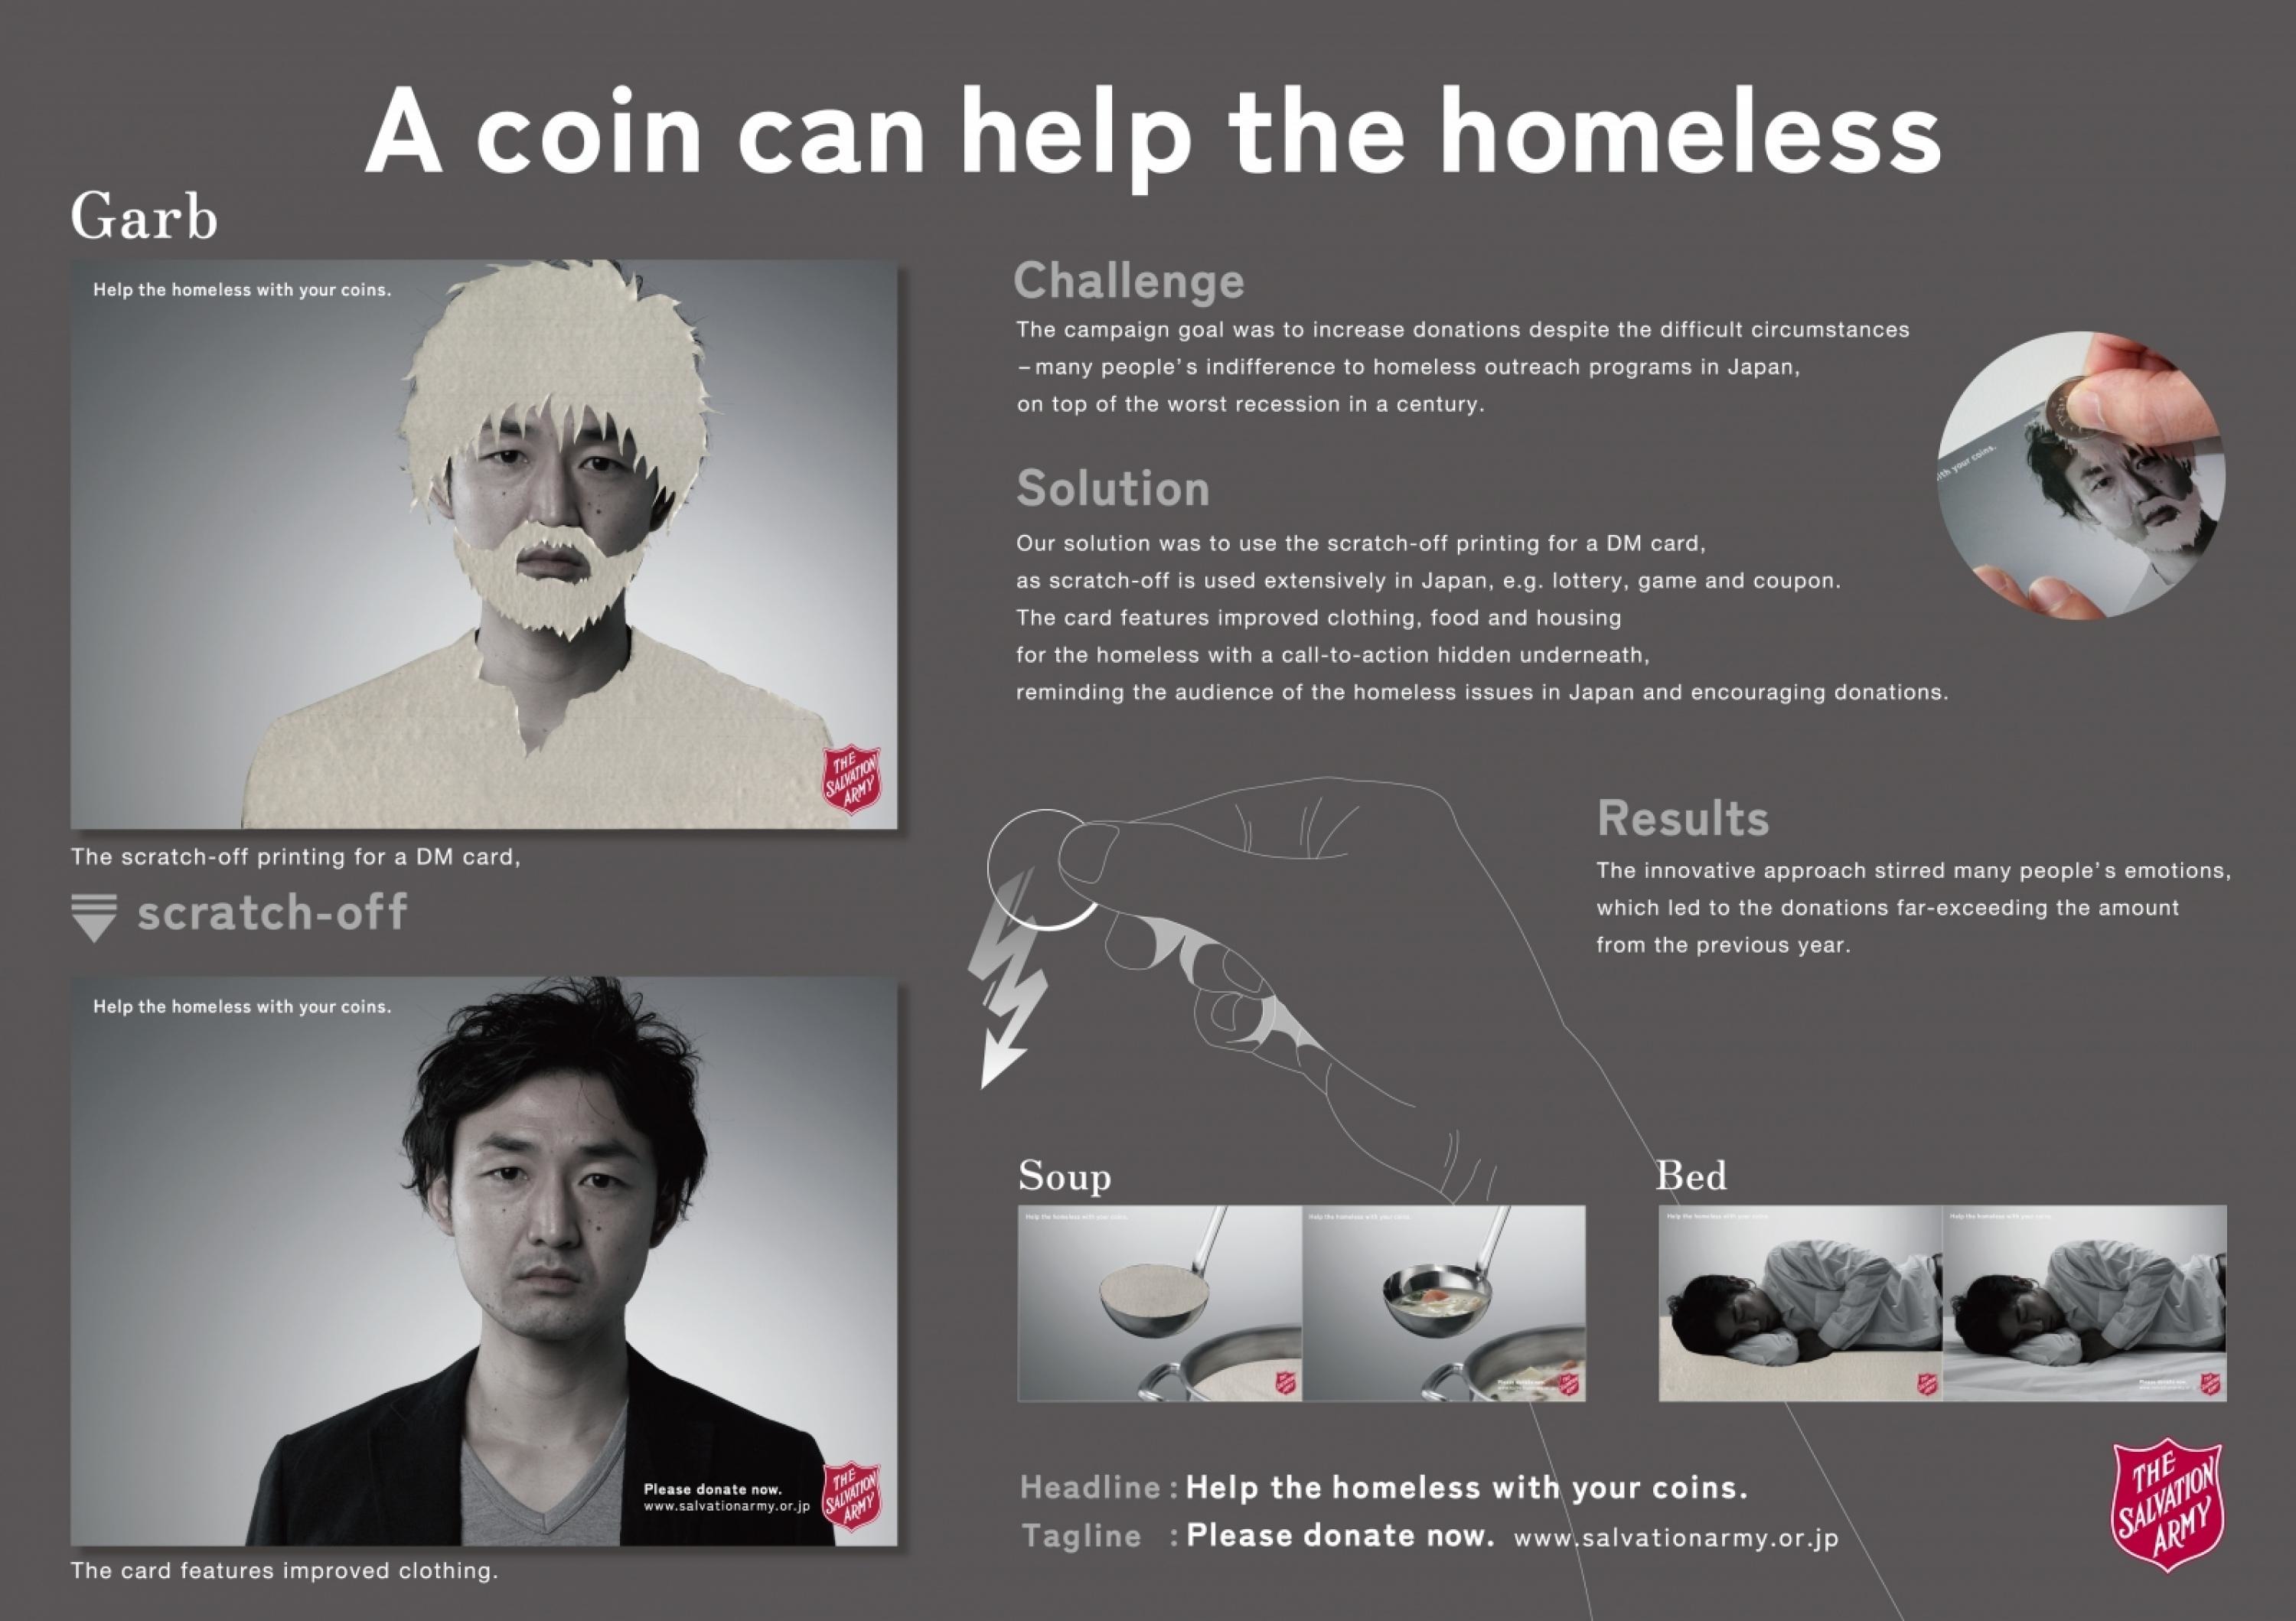 A COIN CAN HELP THE HOMELESS